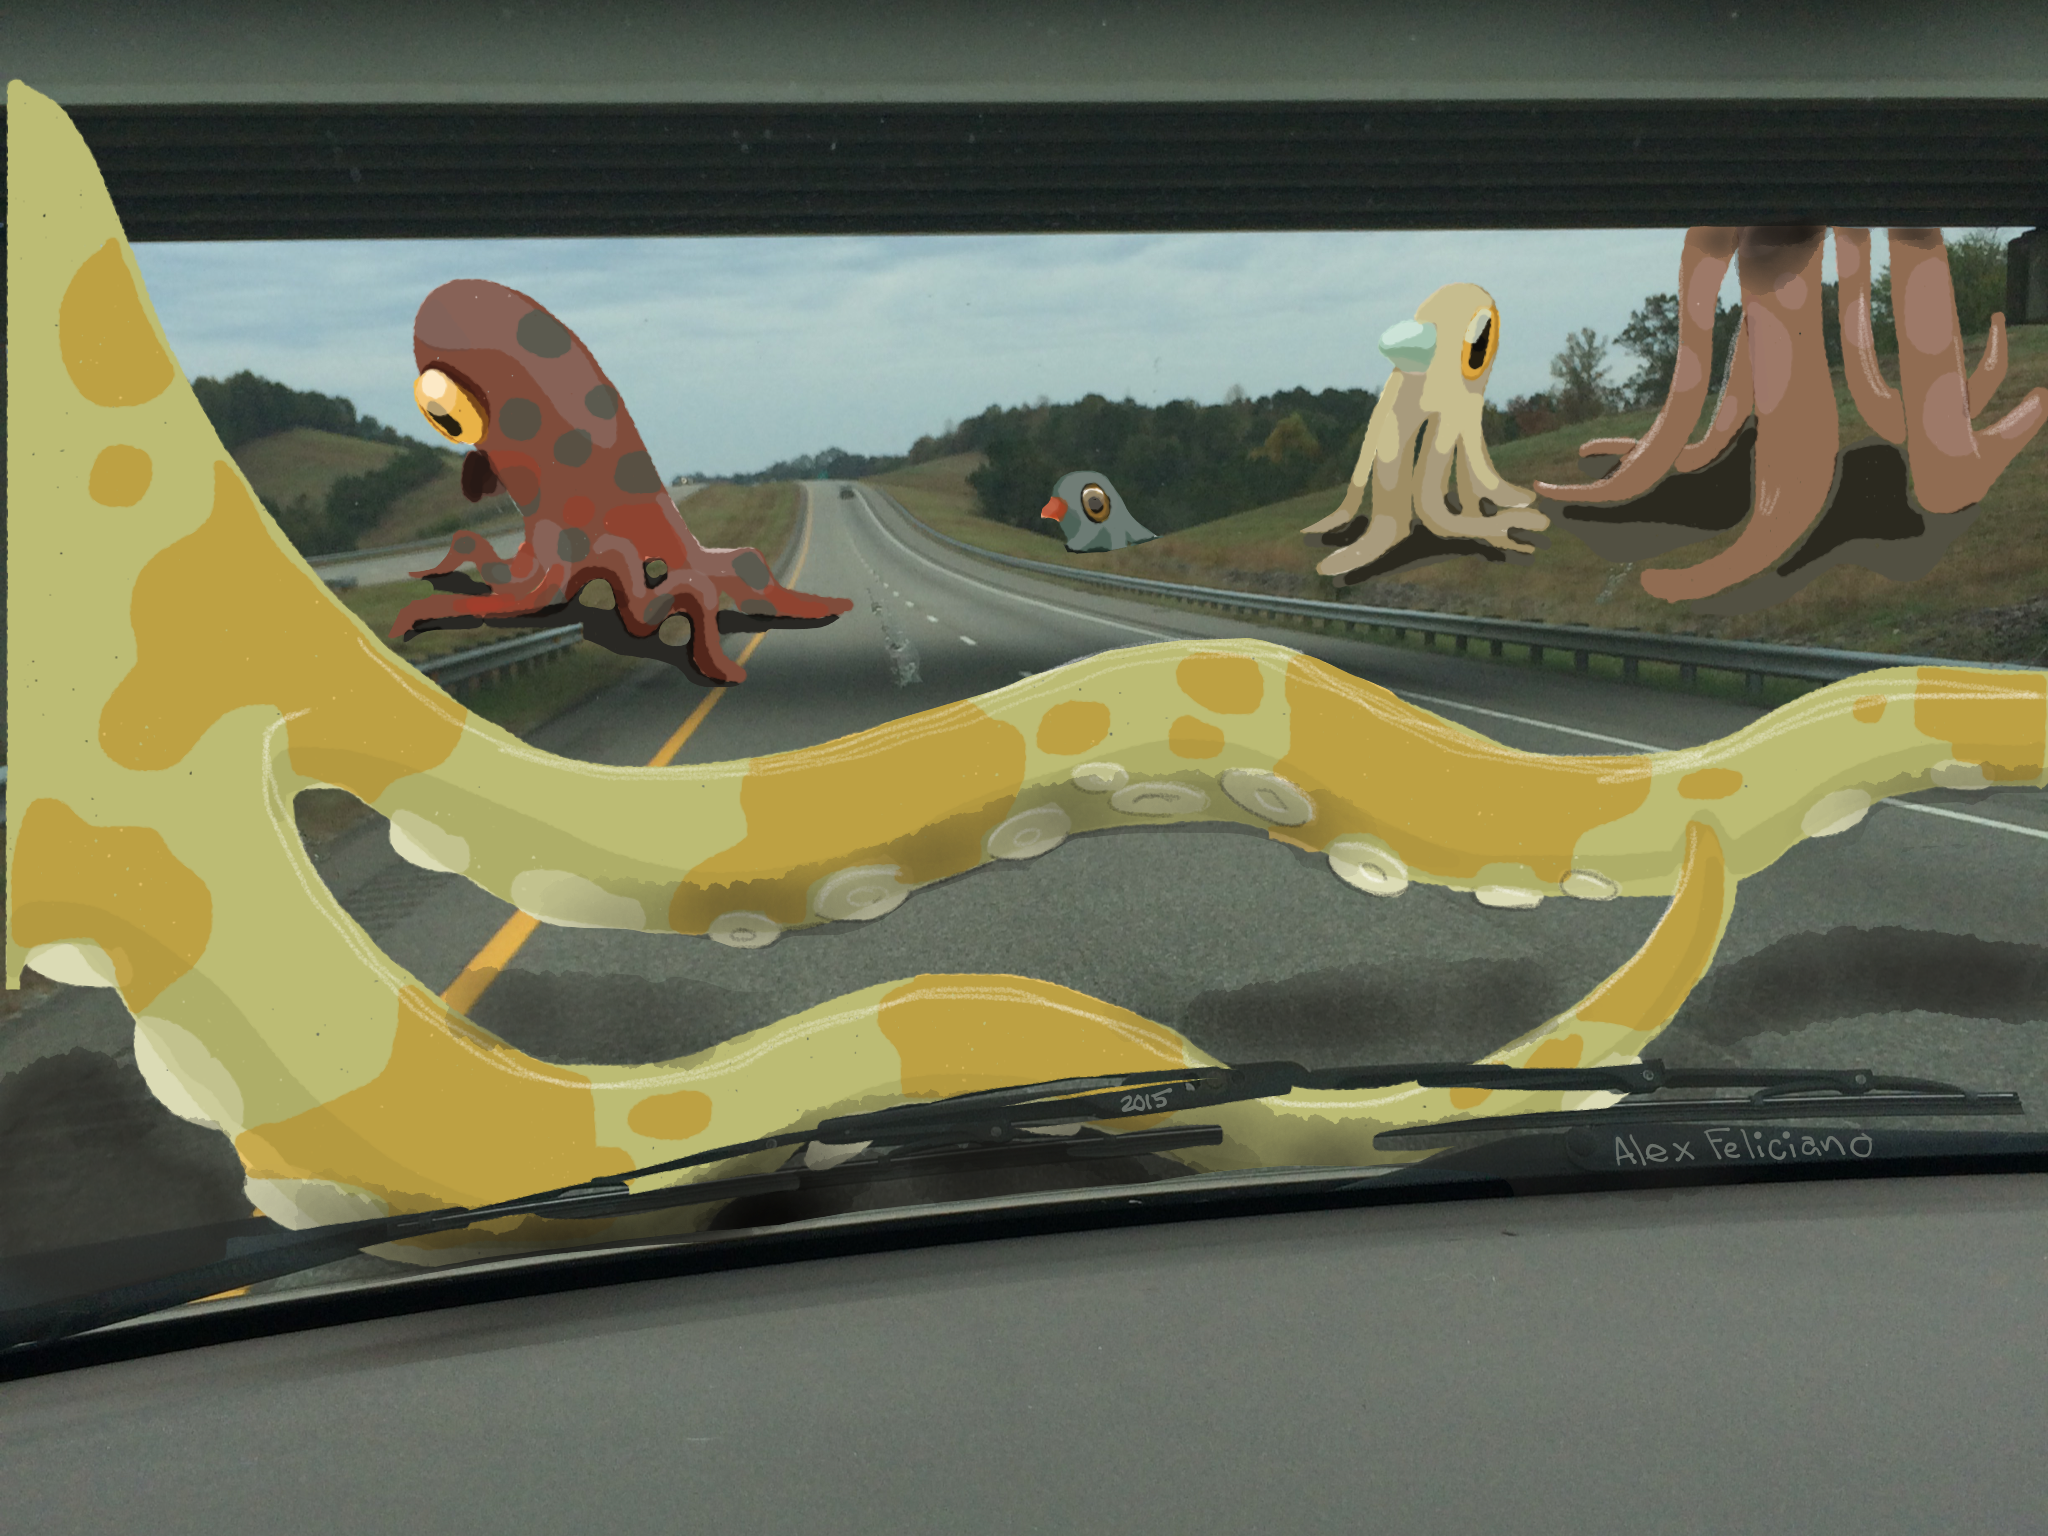 Giant squids crossing a highway.